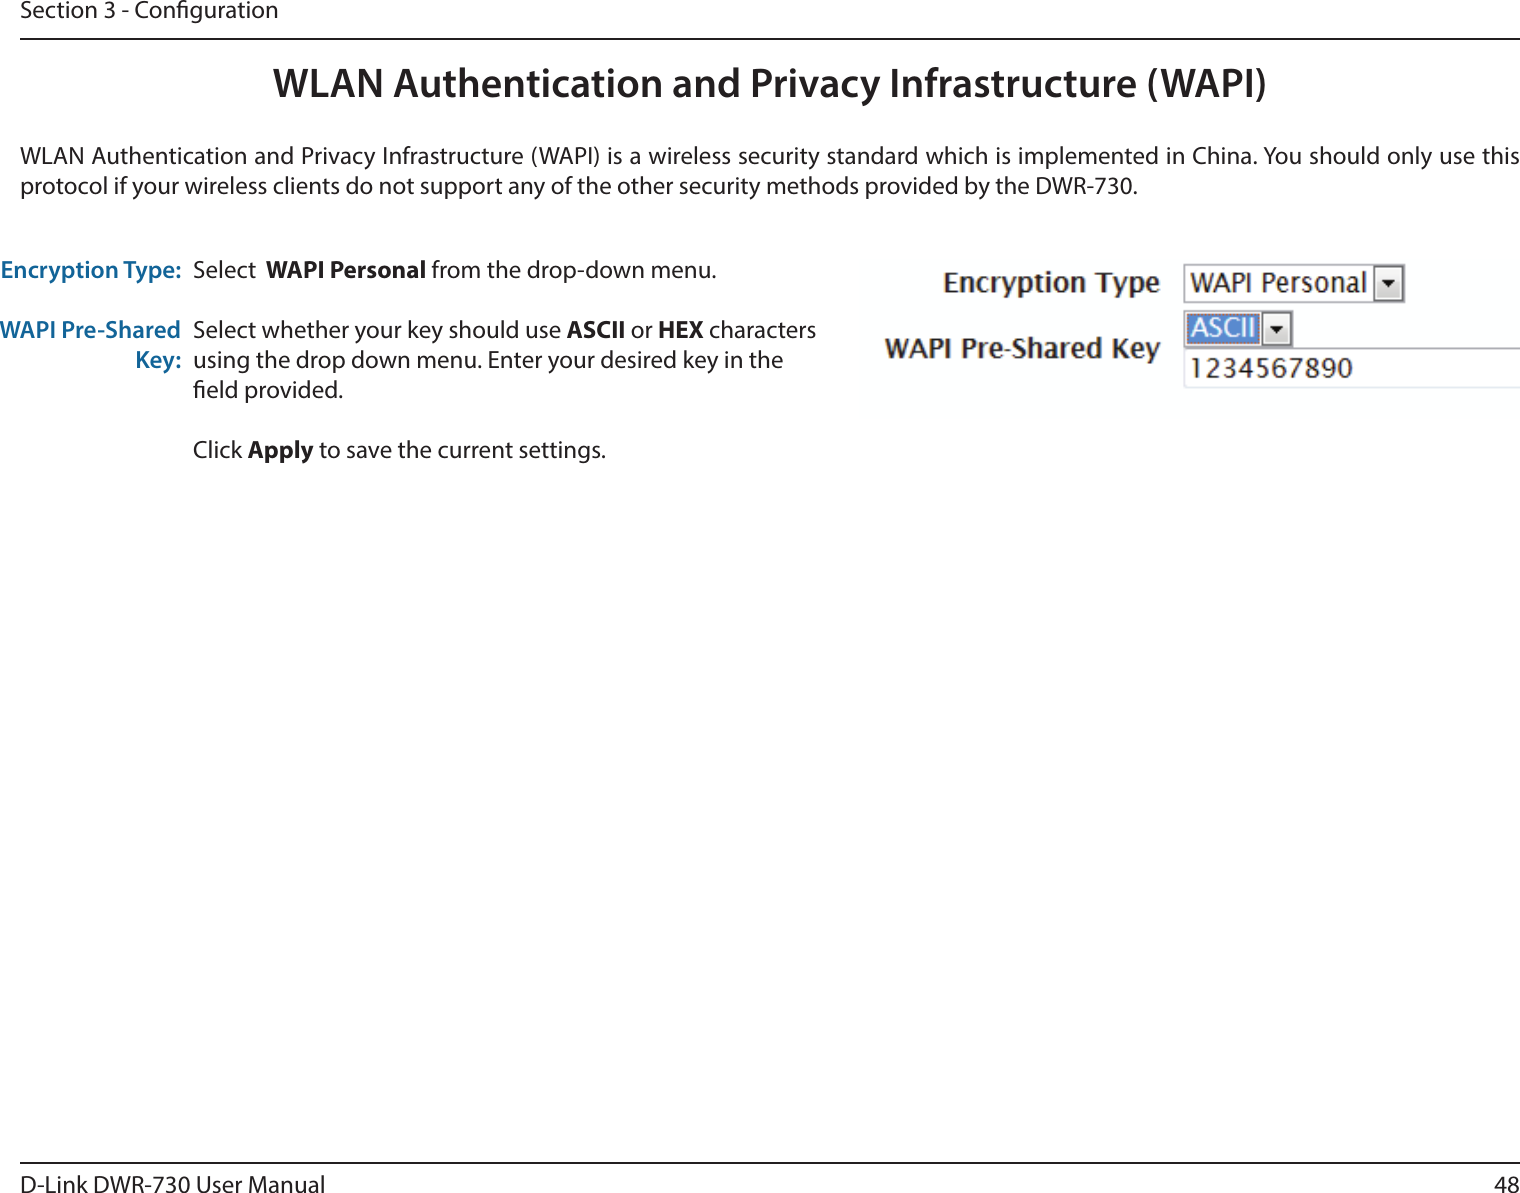 48D-Link DWR-730 User ManualSection 3 - CongurationWLAN Authentication and Privacy Infrastructure (WAPI)WLAN Authentication and Privacy Infrastructure (WAPI) is a wireless security standard which is implemented in China. You should only use this protocol if your wireless clients do not support any of the other security methods provided by the DWR-730.Encryption Type:WAPI Pre-Shared Key:Select  WAPI Personal from the drop-down menu. Select whether your key should use ASCII or HEX characters using the drop down menu. Enter your desired key in the eld provided. Click Apply to save the current settings. 